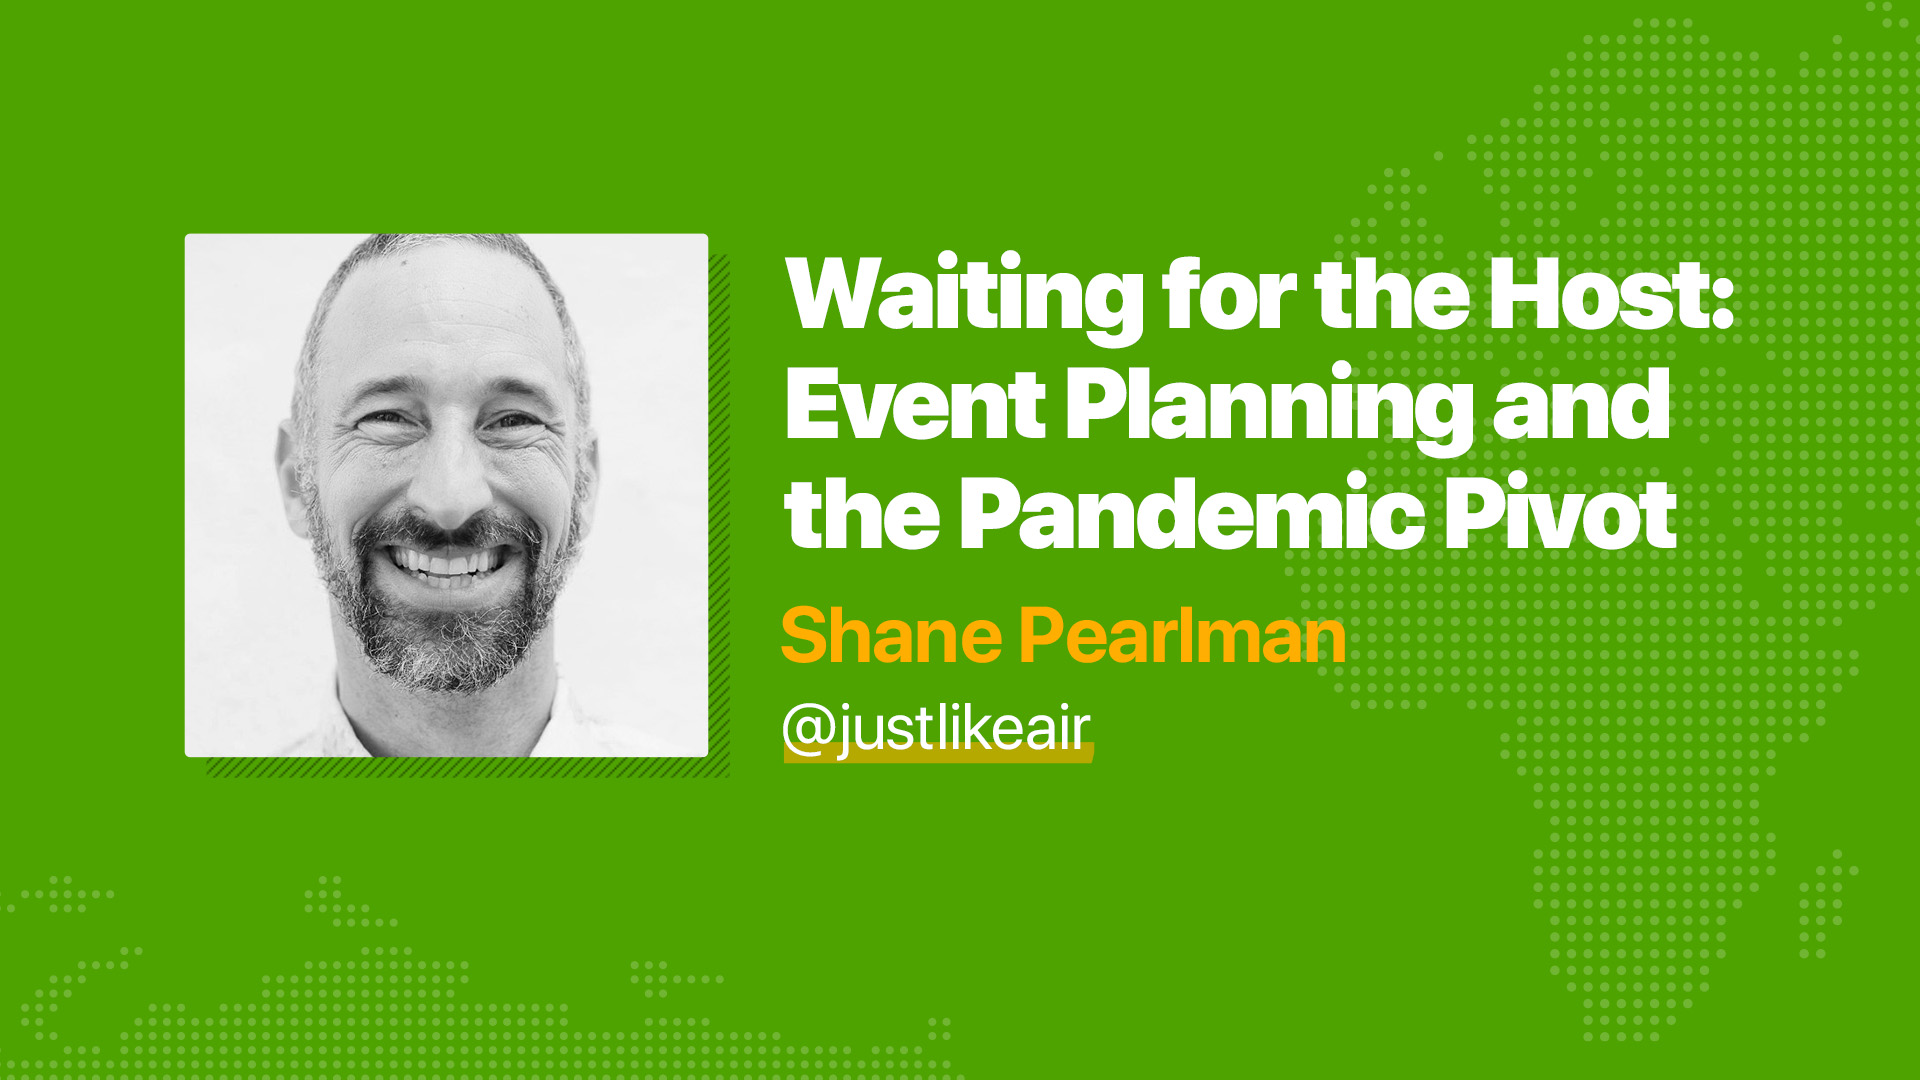 Waiting for the Host: Event Planning and the Pandemic Pivot